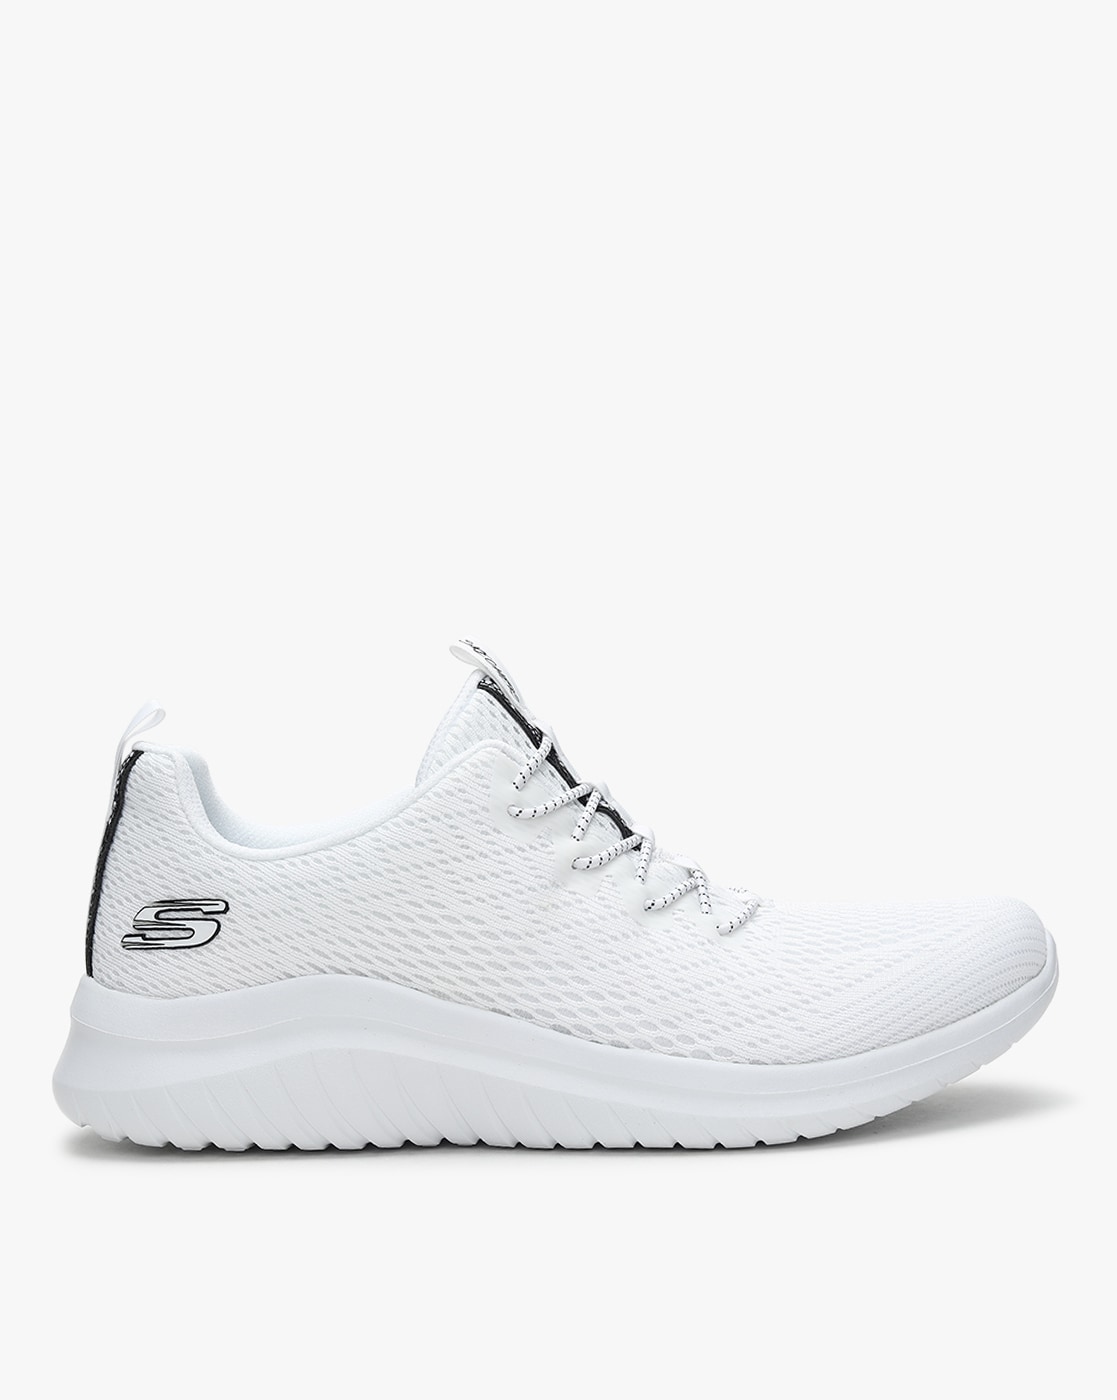 Buy White Casual Shoes for Women Online Ajio.com